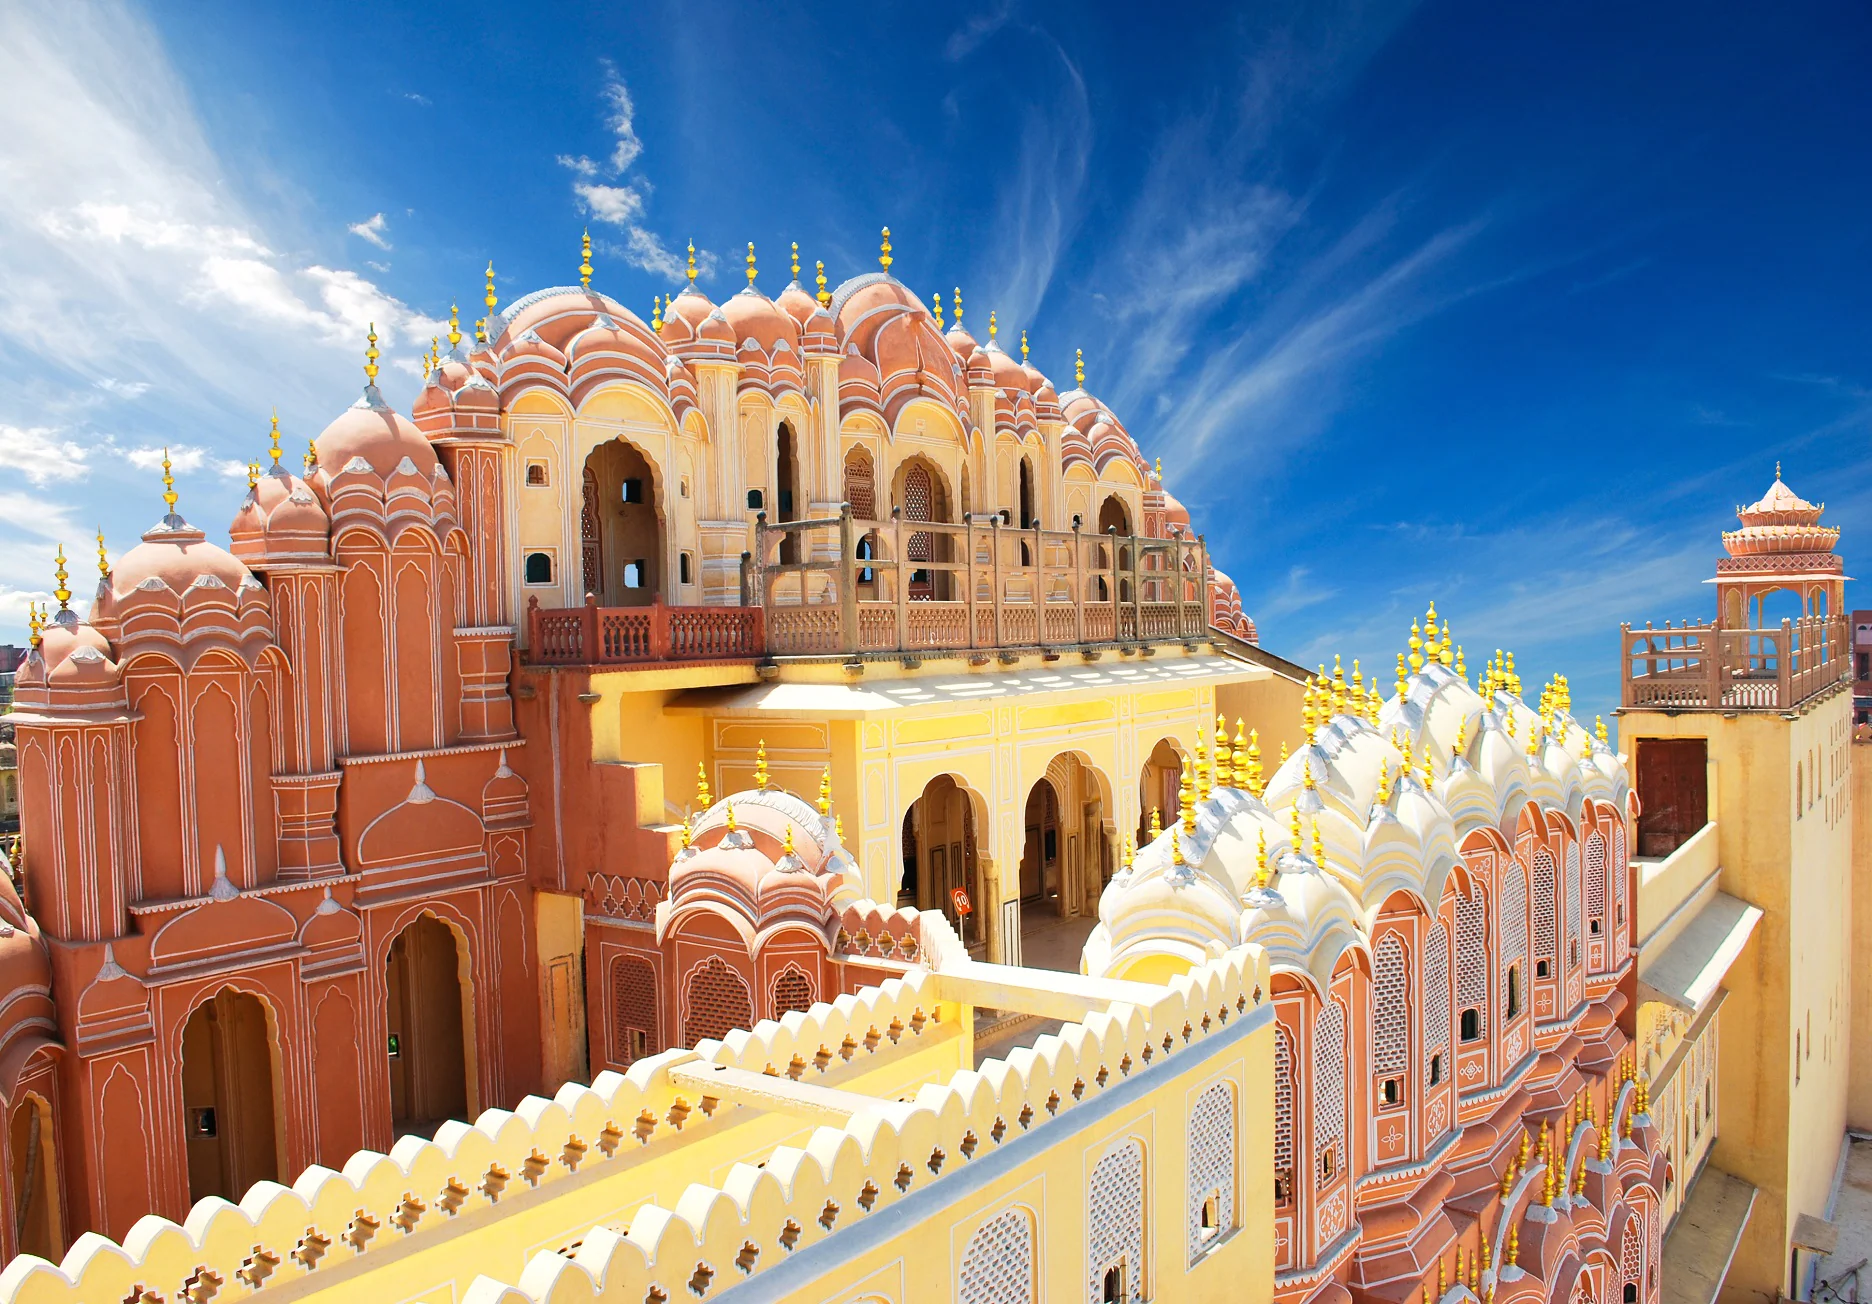 What are the most important attractions of the city of Jaipur that you need to witness